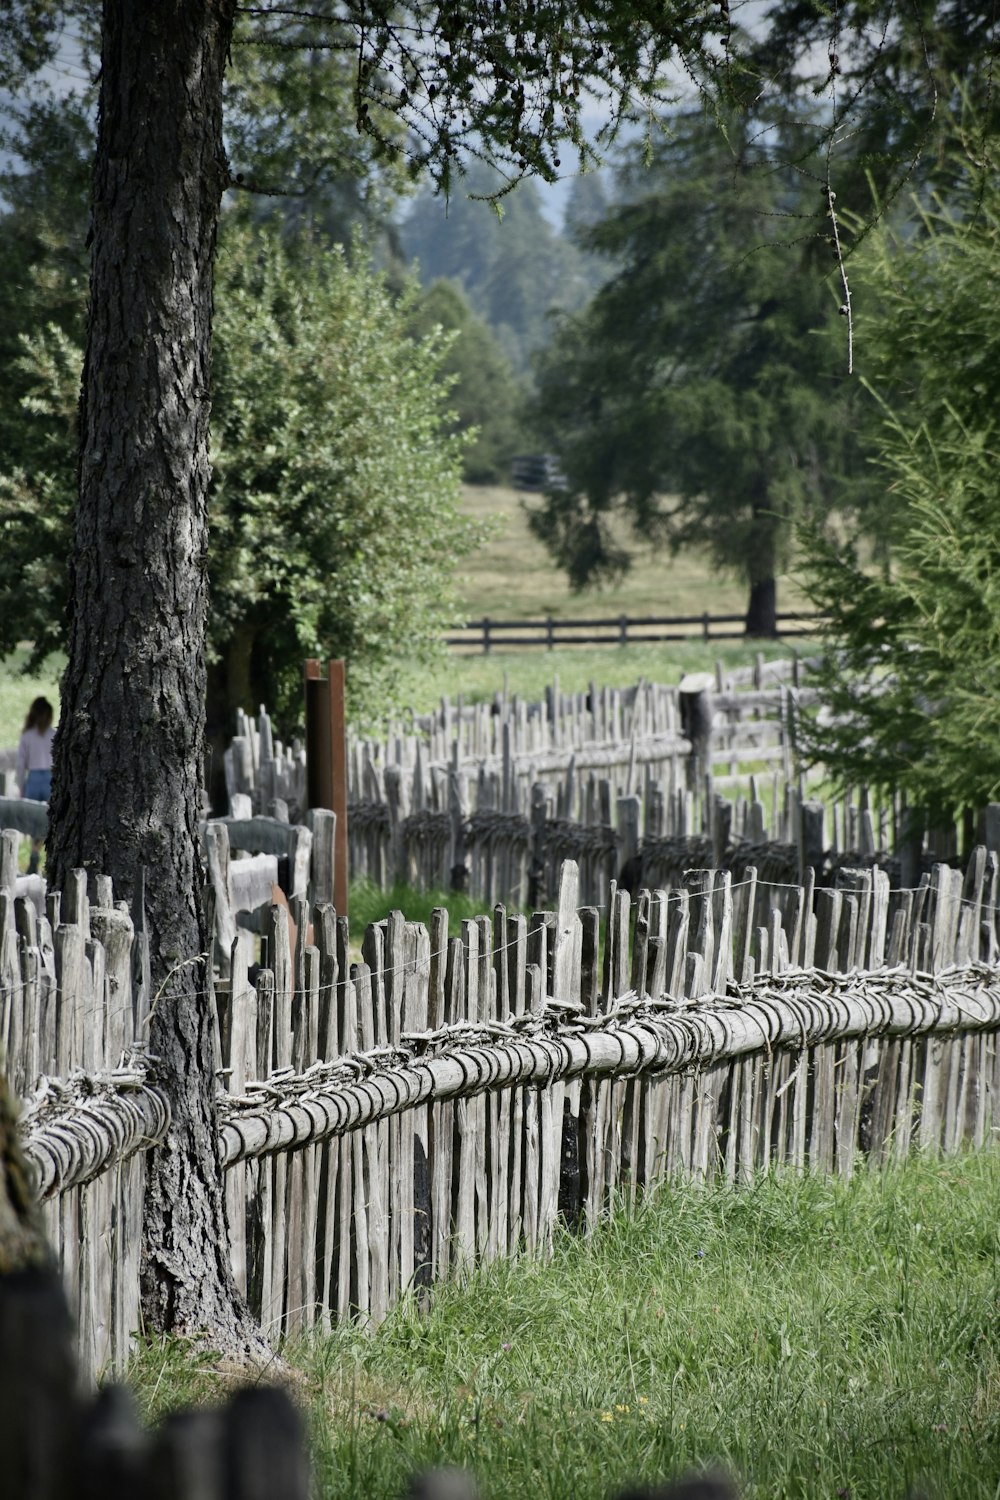 a fenced in area with a tree and a wooden fence